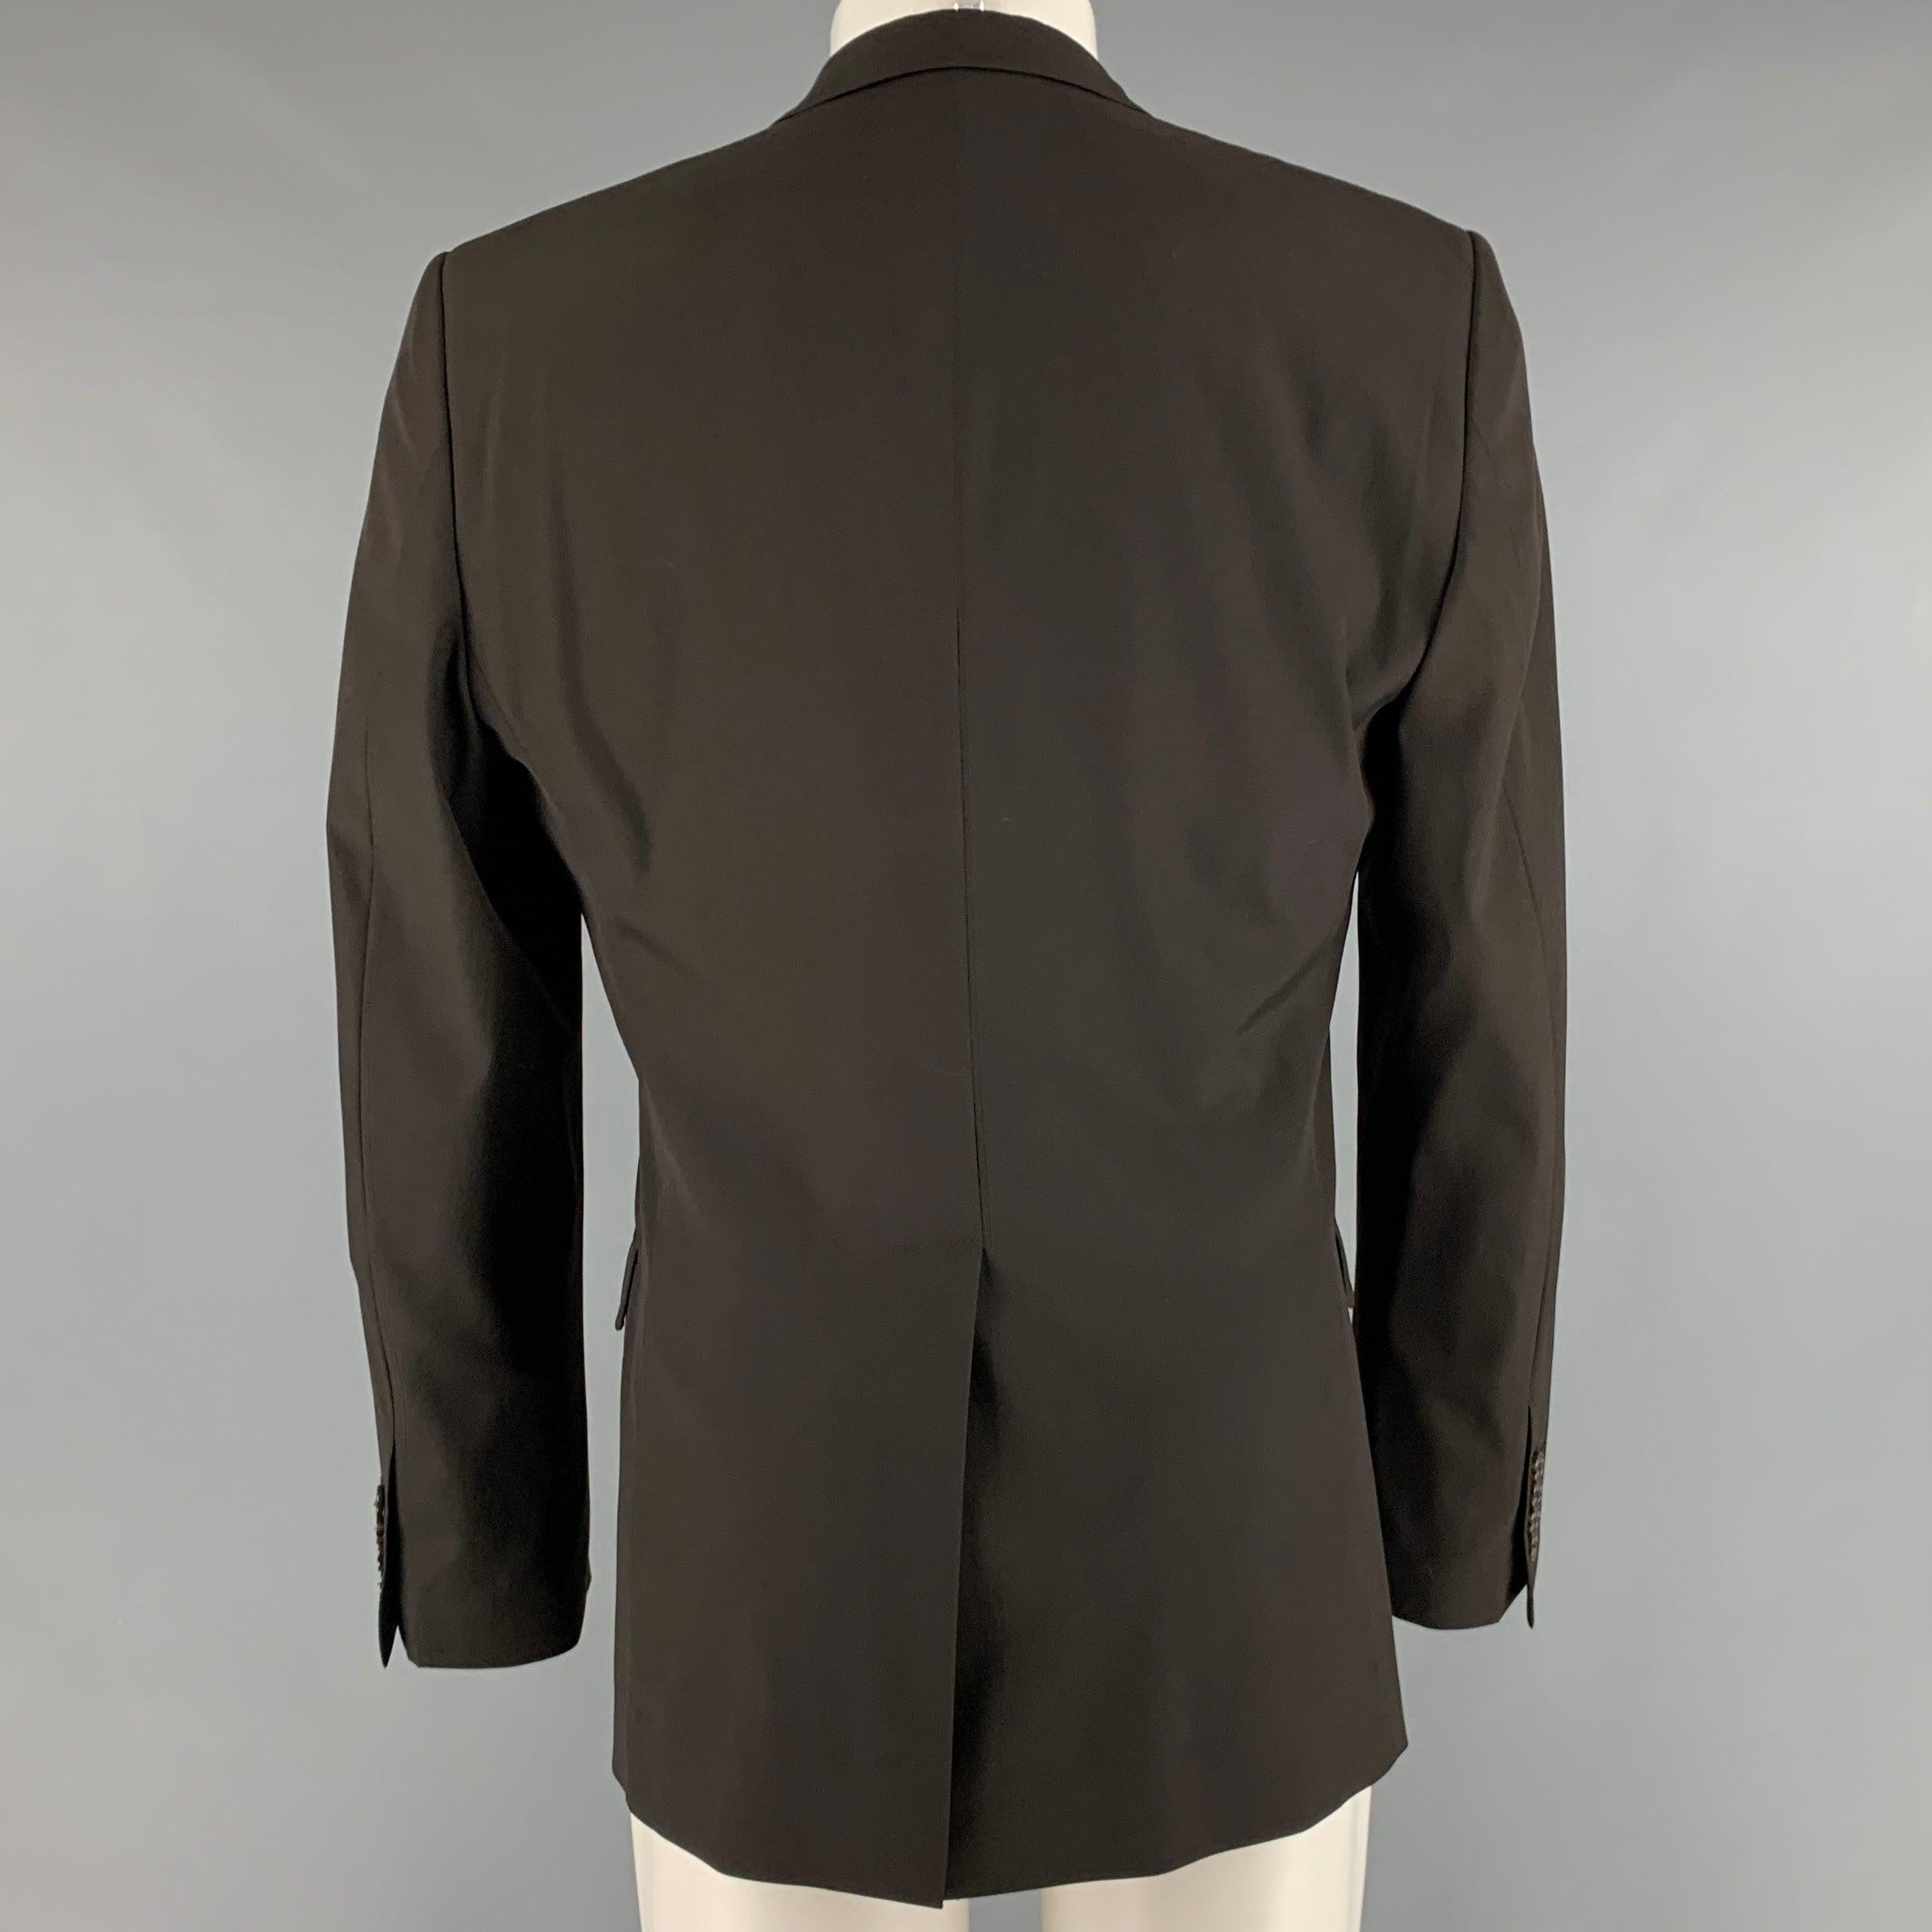 DOLCE & GABBANA Size 40 Brown Virgin Wool Blend Notch Lapel Sport Coat In Excellent Condition For Sale In San Francisco, CA